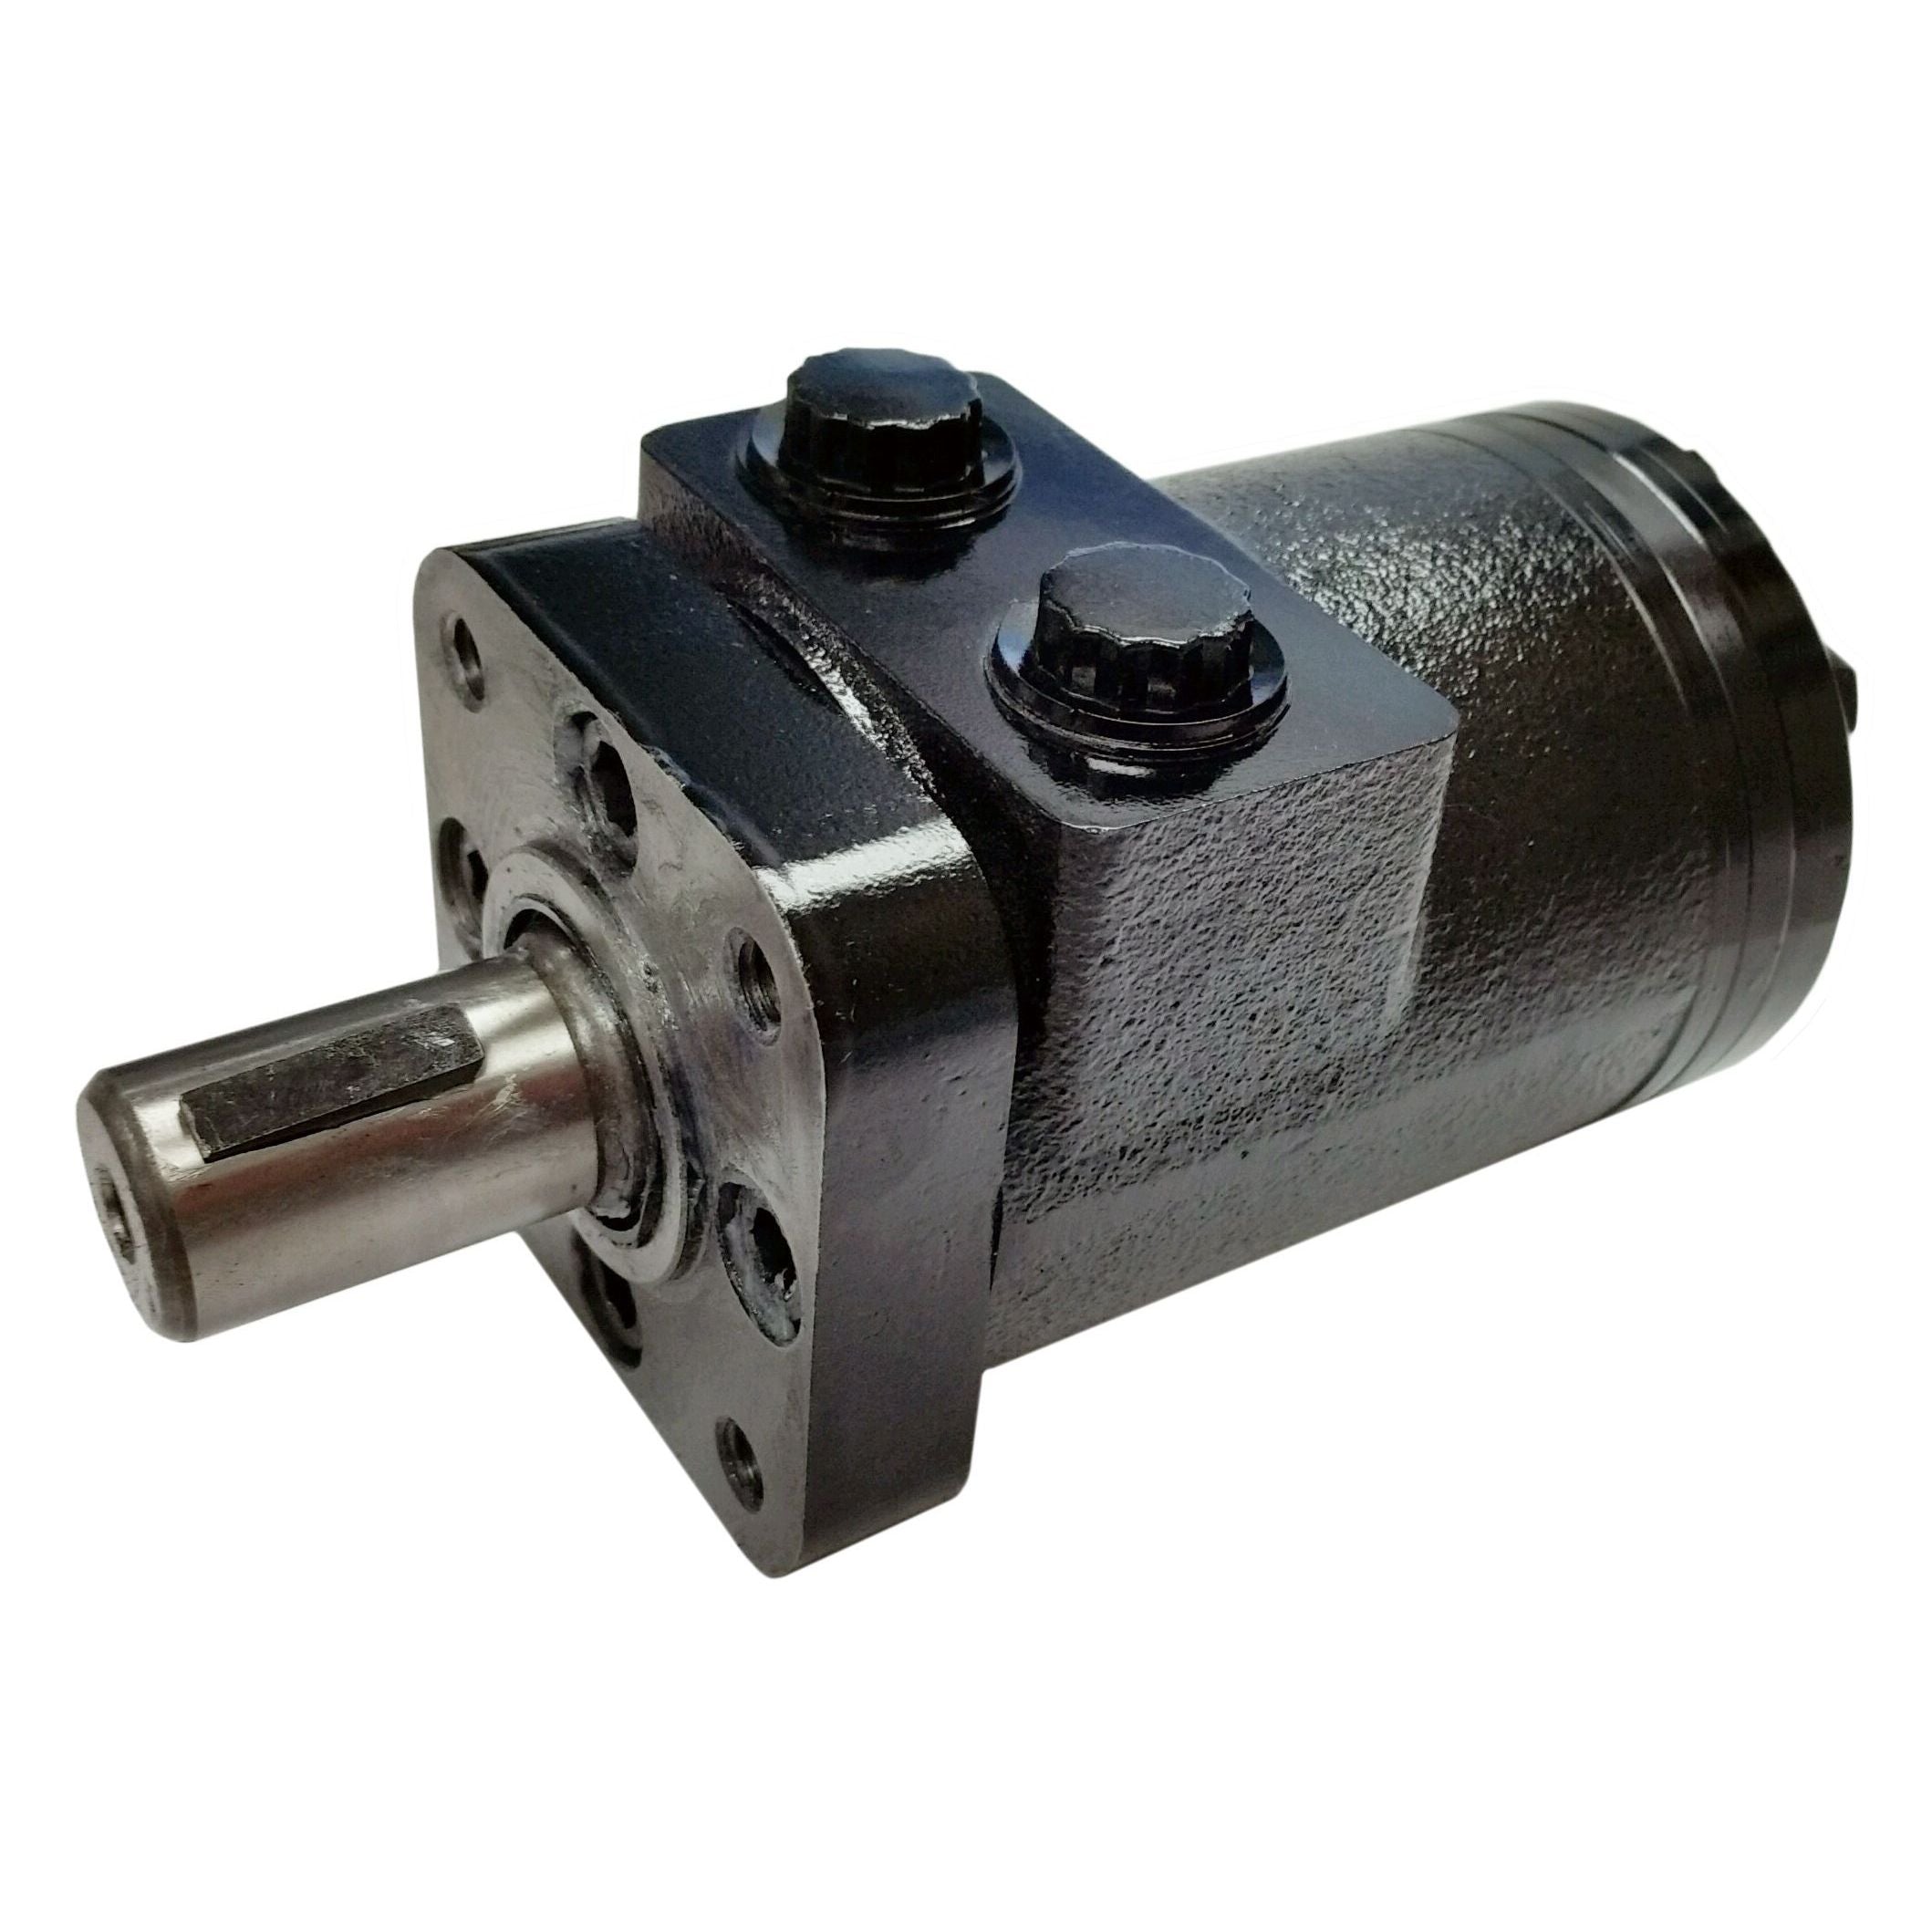 BMPH-100-H4-K-S : Dynamic LSHT Motor, 96.2cc, 615RPM, 1611in-lb, 2031psi Differential, 15.85GPM, SAE A 4-Bolt Mount, 1" Bore x 1/4" Key Shaft, Side Ported, #10 SAE (5/8")